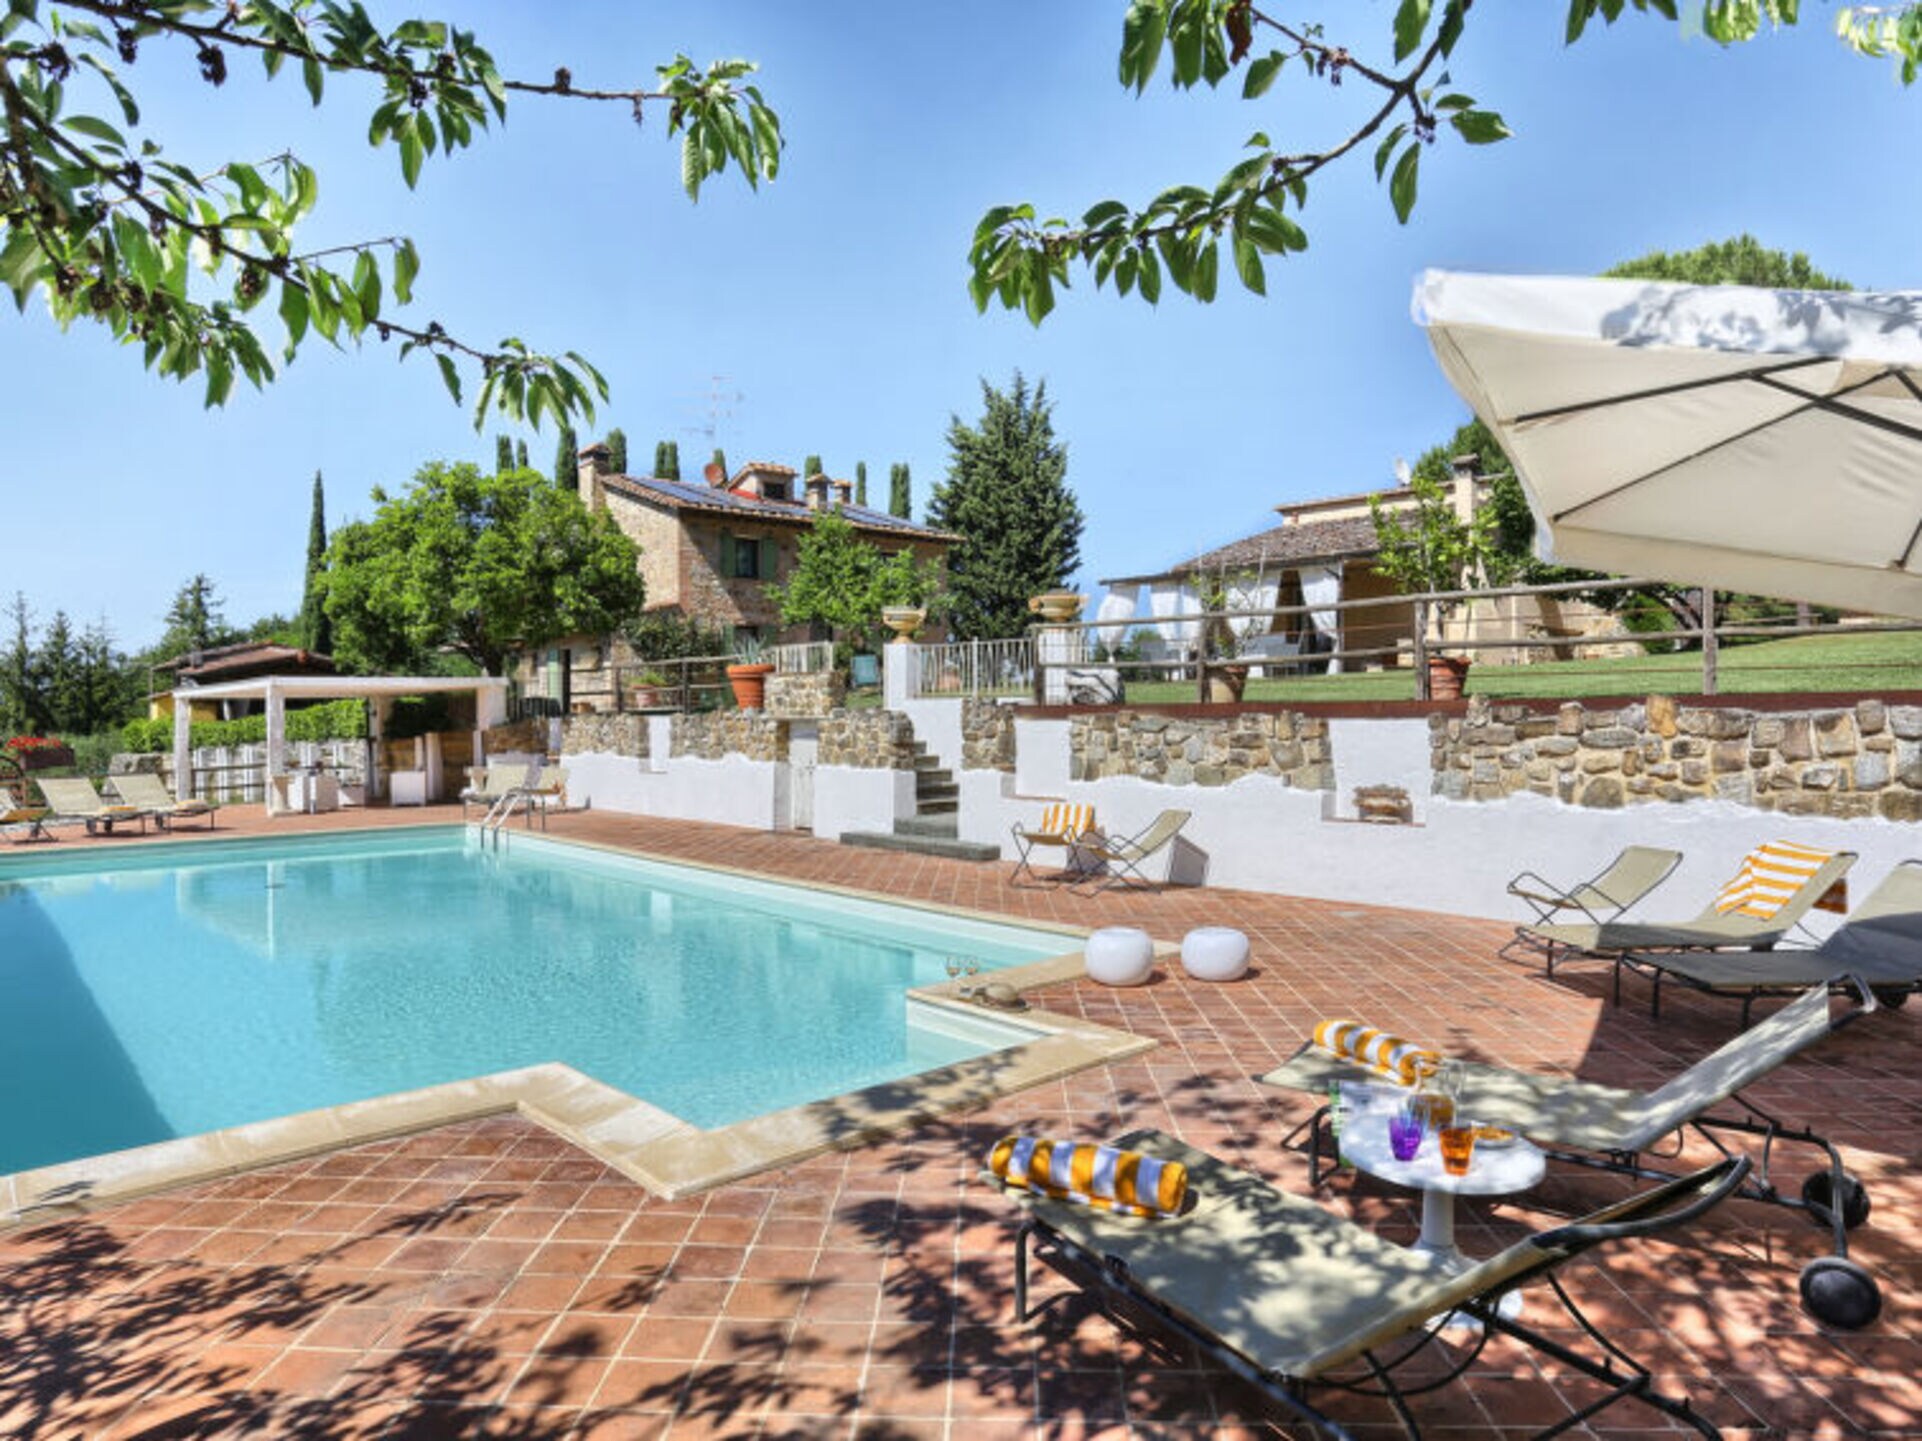 Property Image 1 - Villa with First Class Amenities, Tuscany Villa 1112